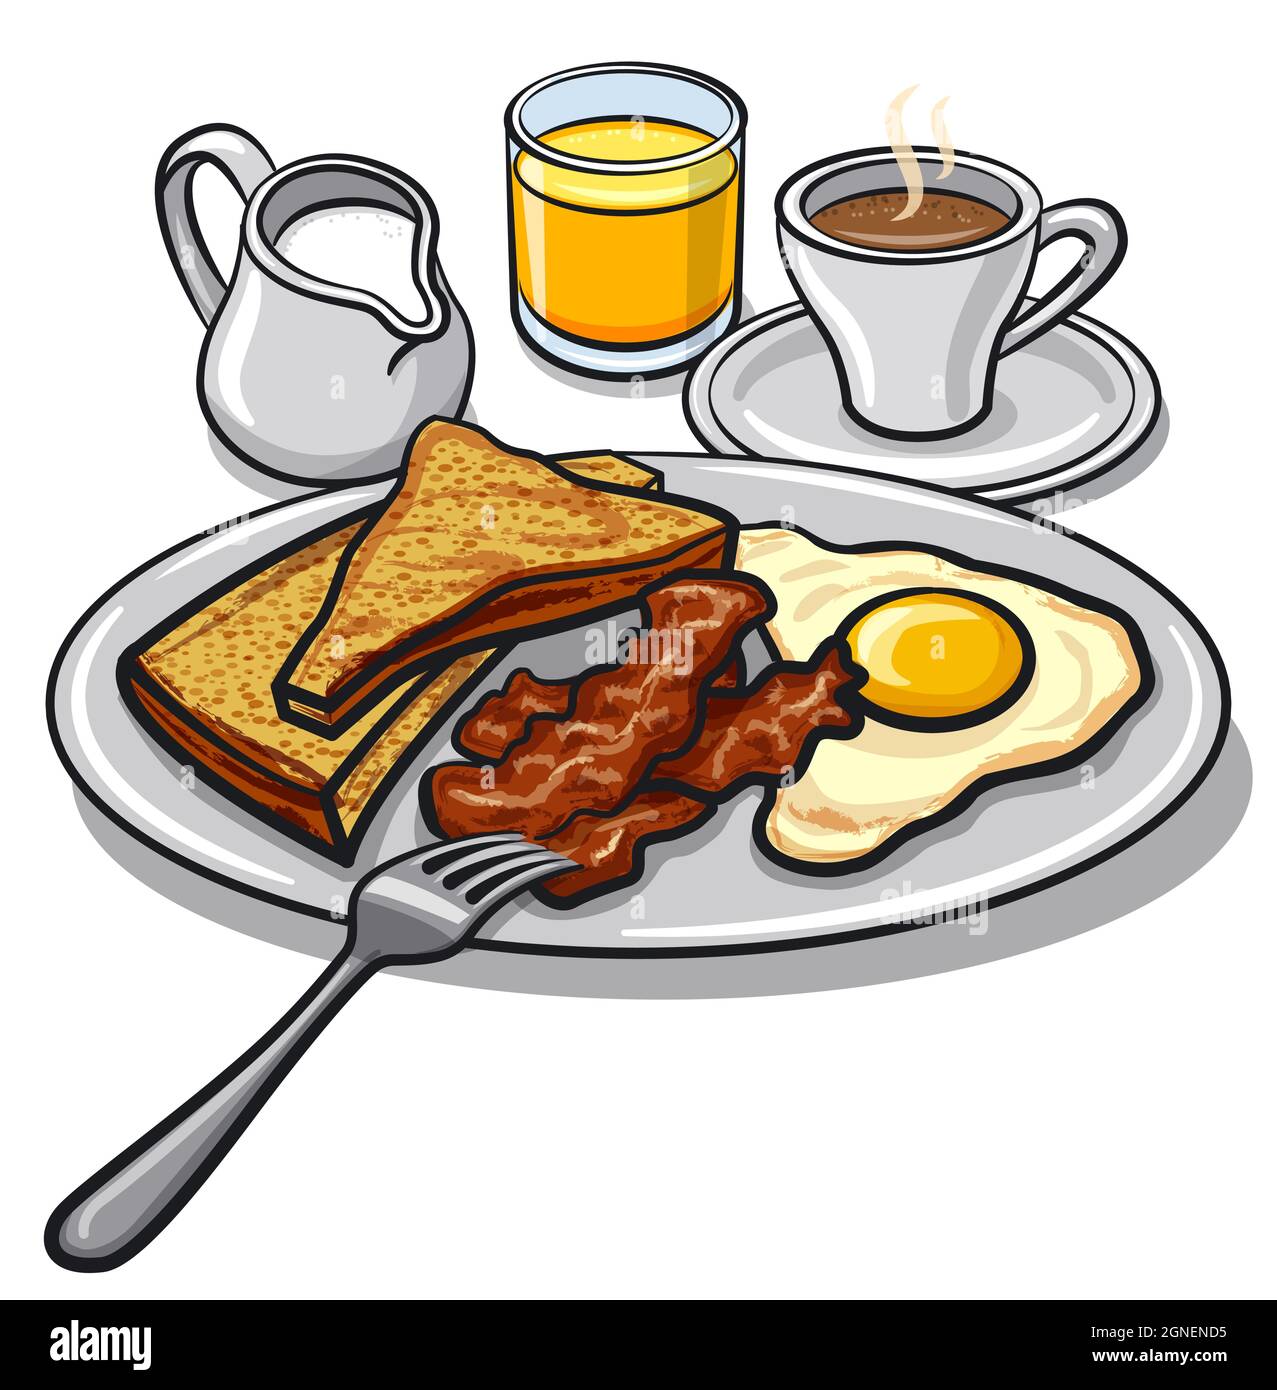 Illustration of the roasted bacon, egg, toasts on the plate and drinks. Stock Vector